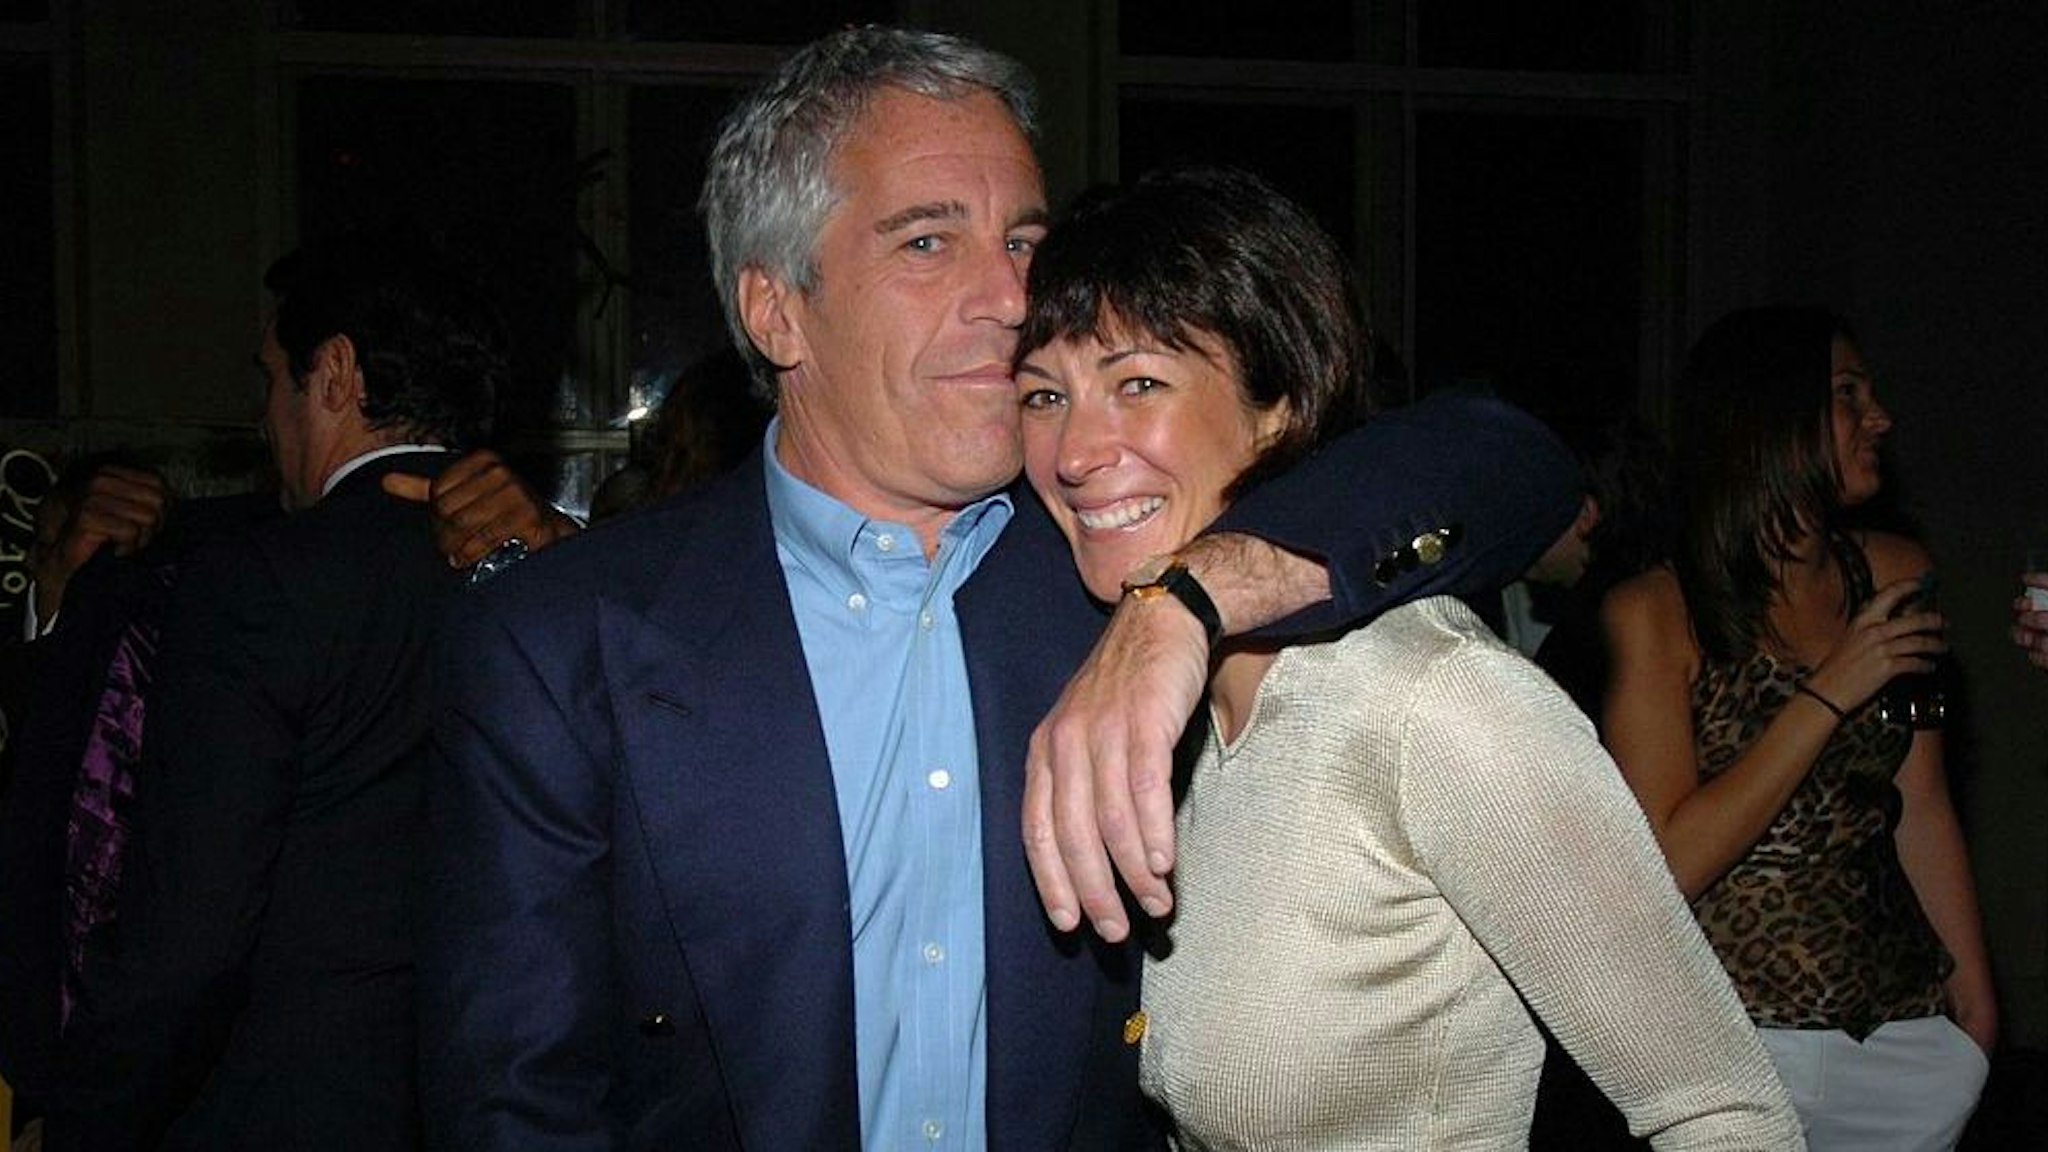 Jeffrey Epstein and Ghislaine Maxwell attend de Grisogono Sponsors The 2005 Wall Street Concert Series Benefitting Wall Street Rising, with a Performance by Rod Stewart at Cipriani Wall Street on March 15, 2005 in New York City.